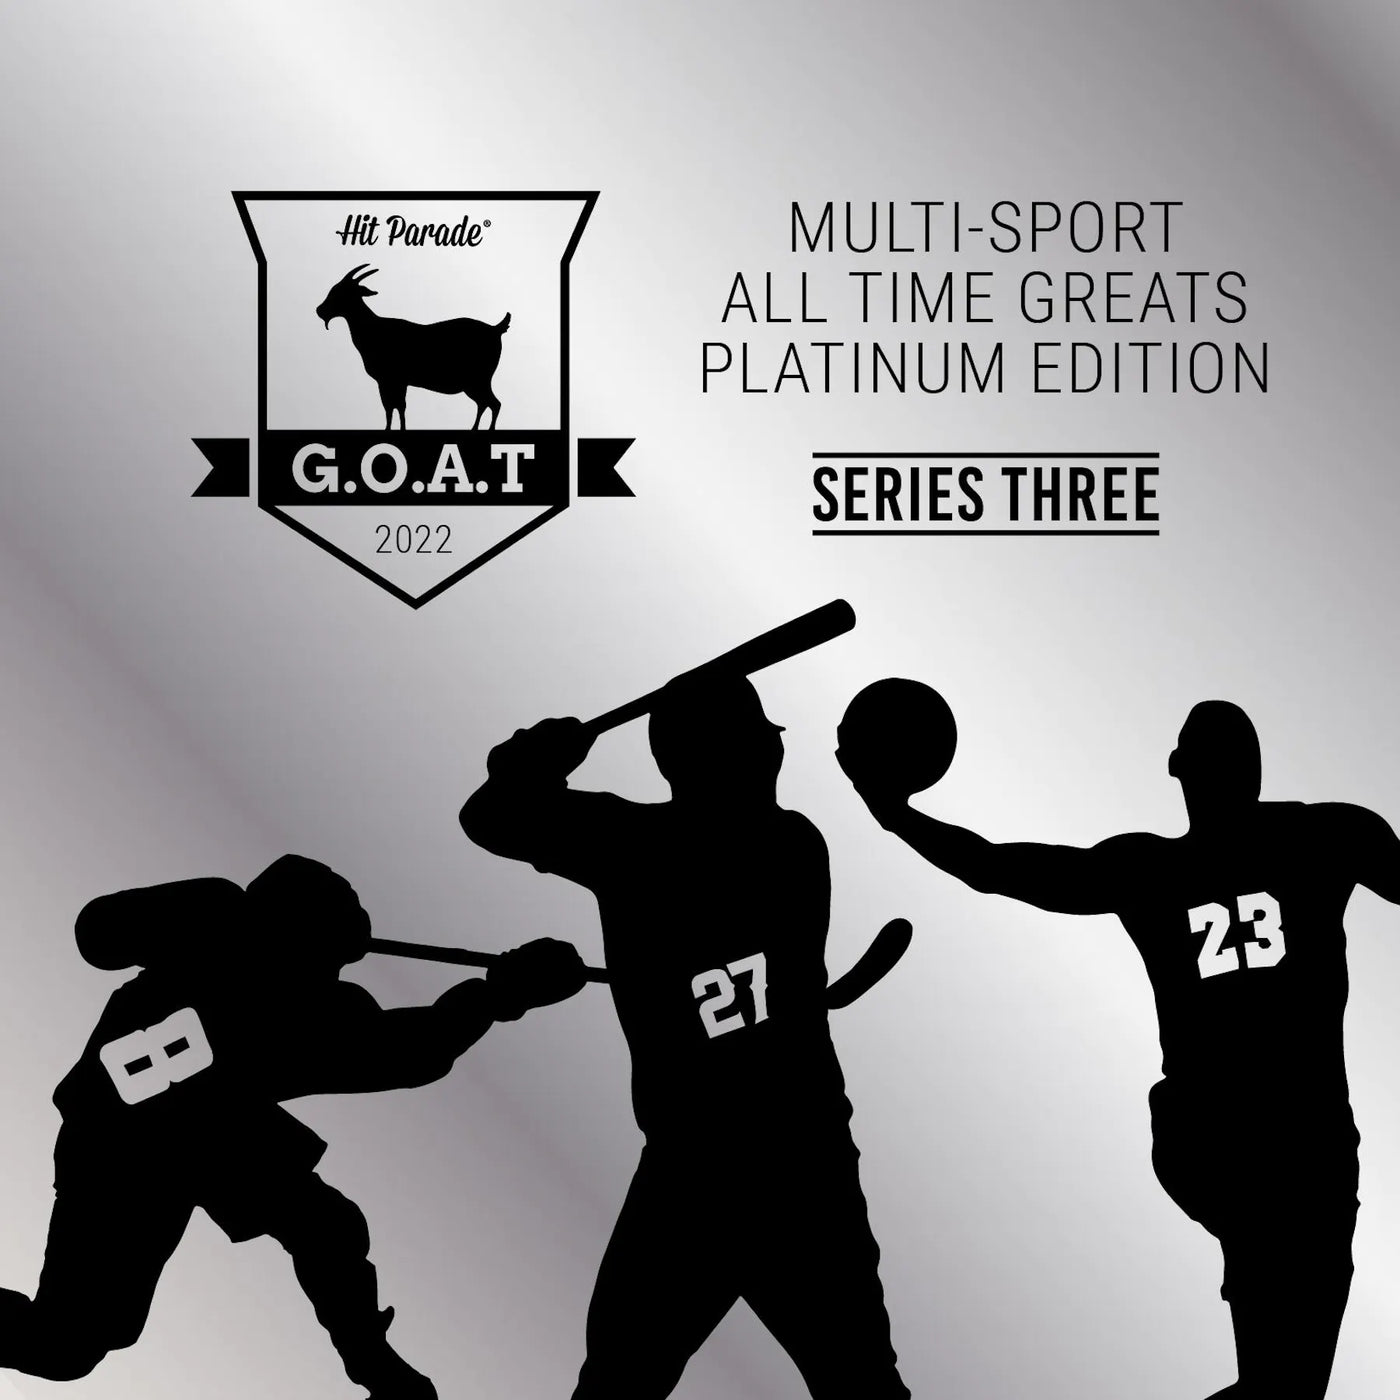 2022 Hit Parade GOAT All-Time Greats Multi-Sport Platinum Edition Series 3 Hobby Box